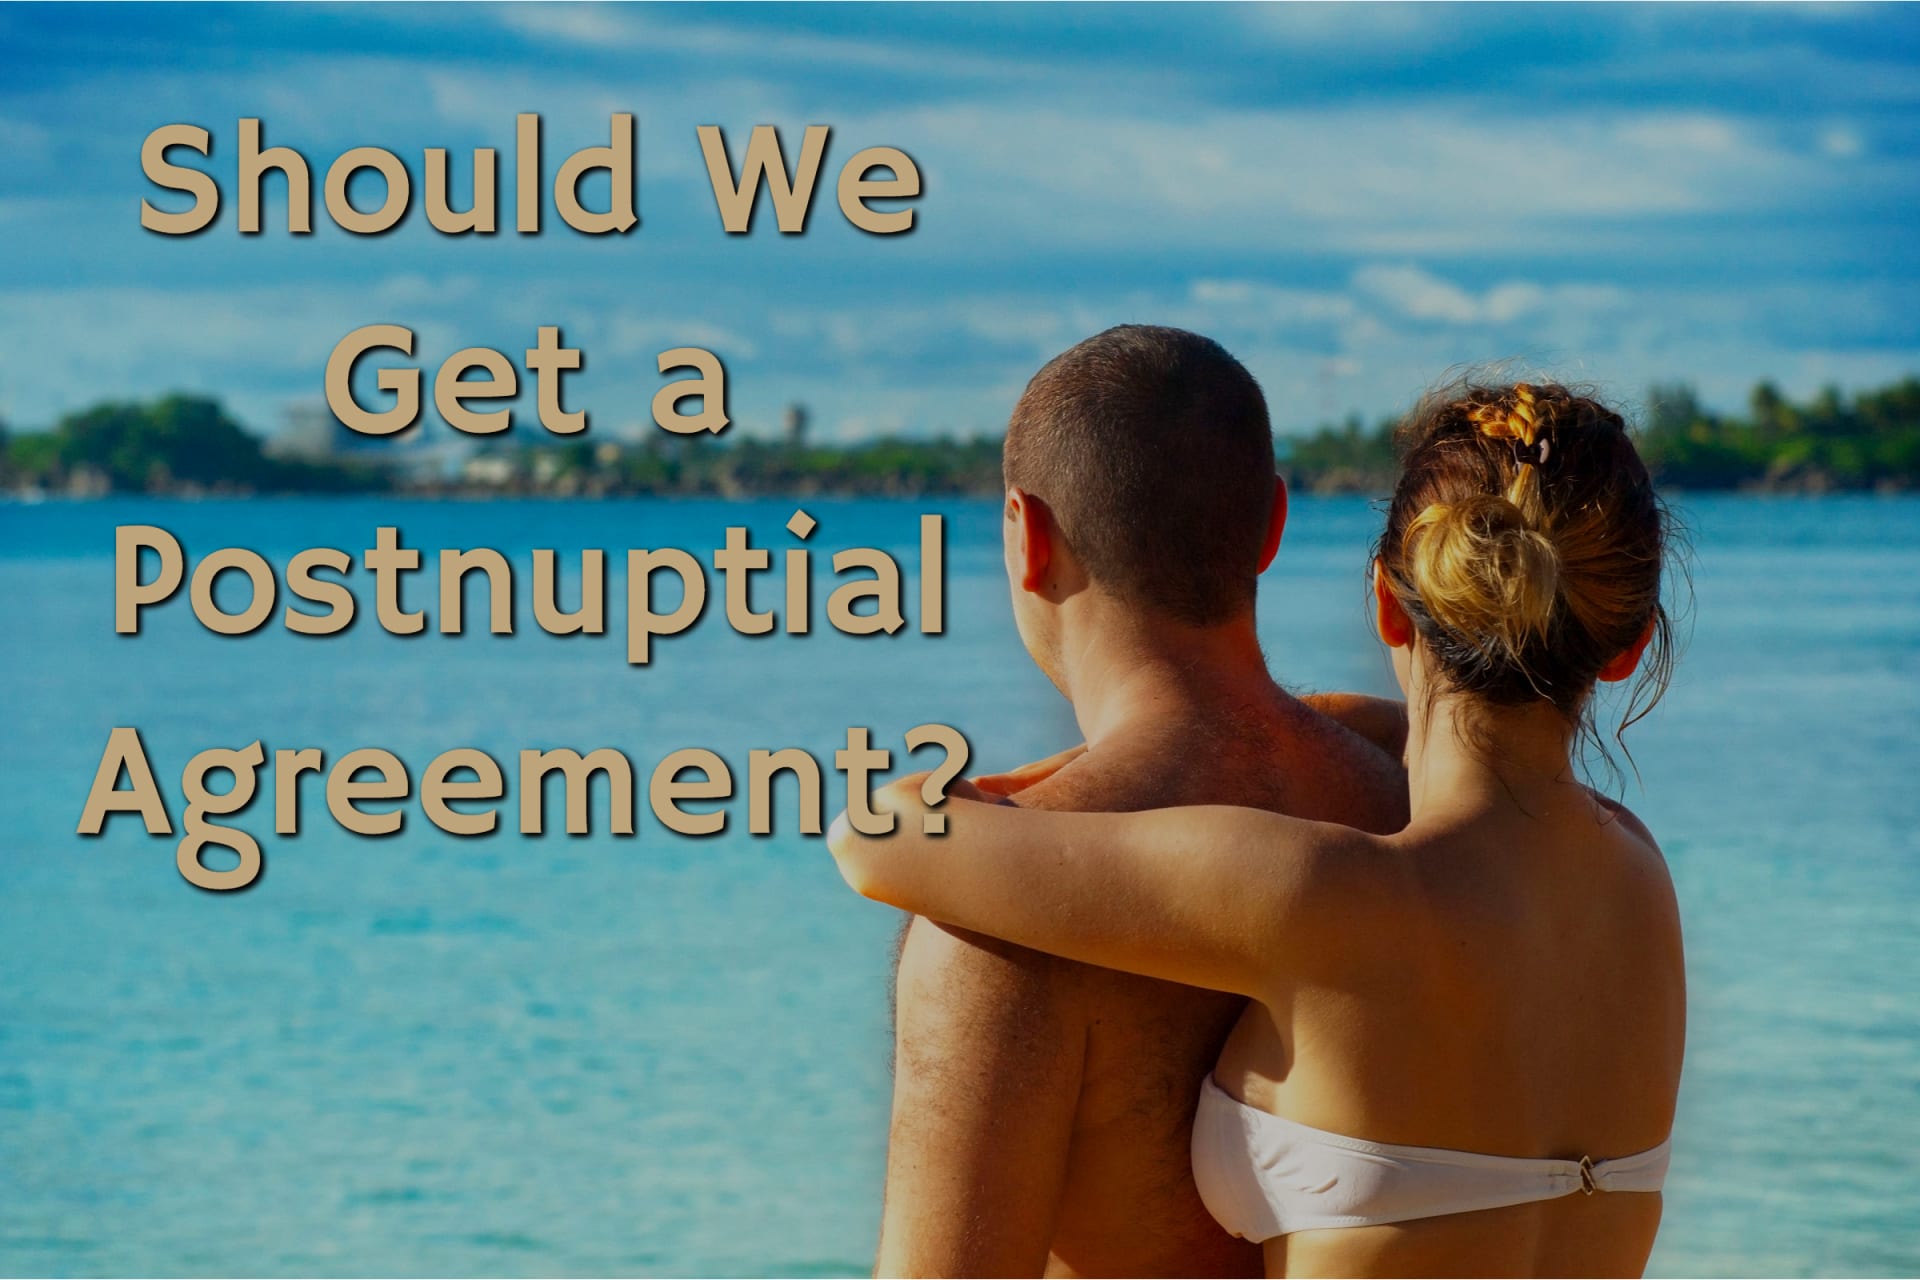 When is it a Good Idea to Have a Postnuptial Agreement?